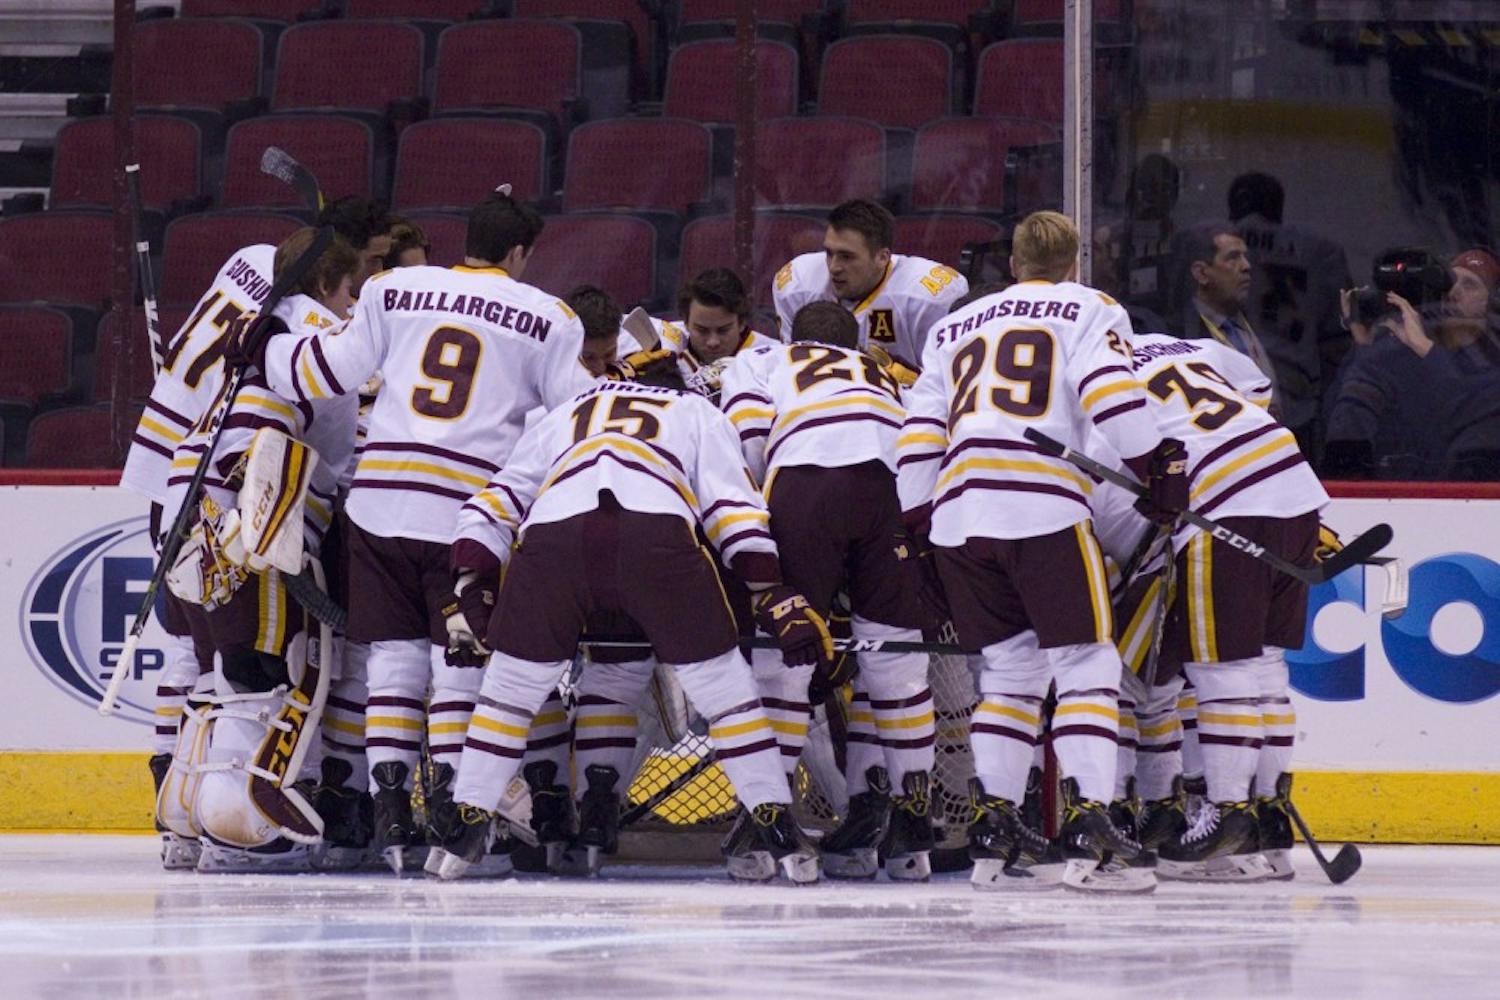 The ASU men's hockey team huddles up before a 5-2 victory against Air Force in Gila River Arena in Glendale, Arizona, on Sunday, Oct. 16, 2016.